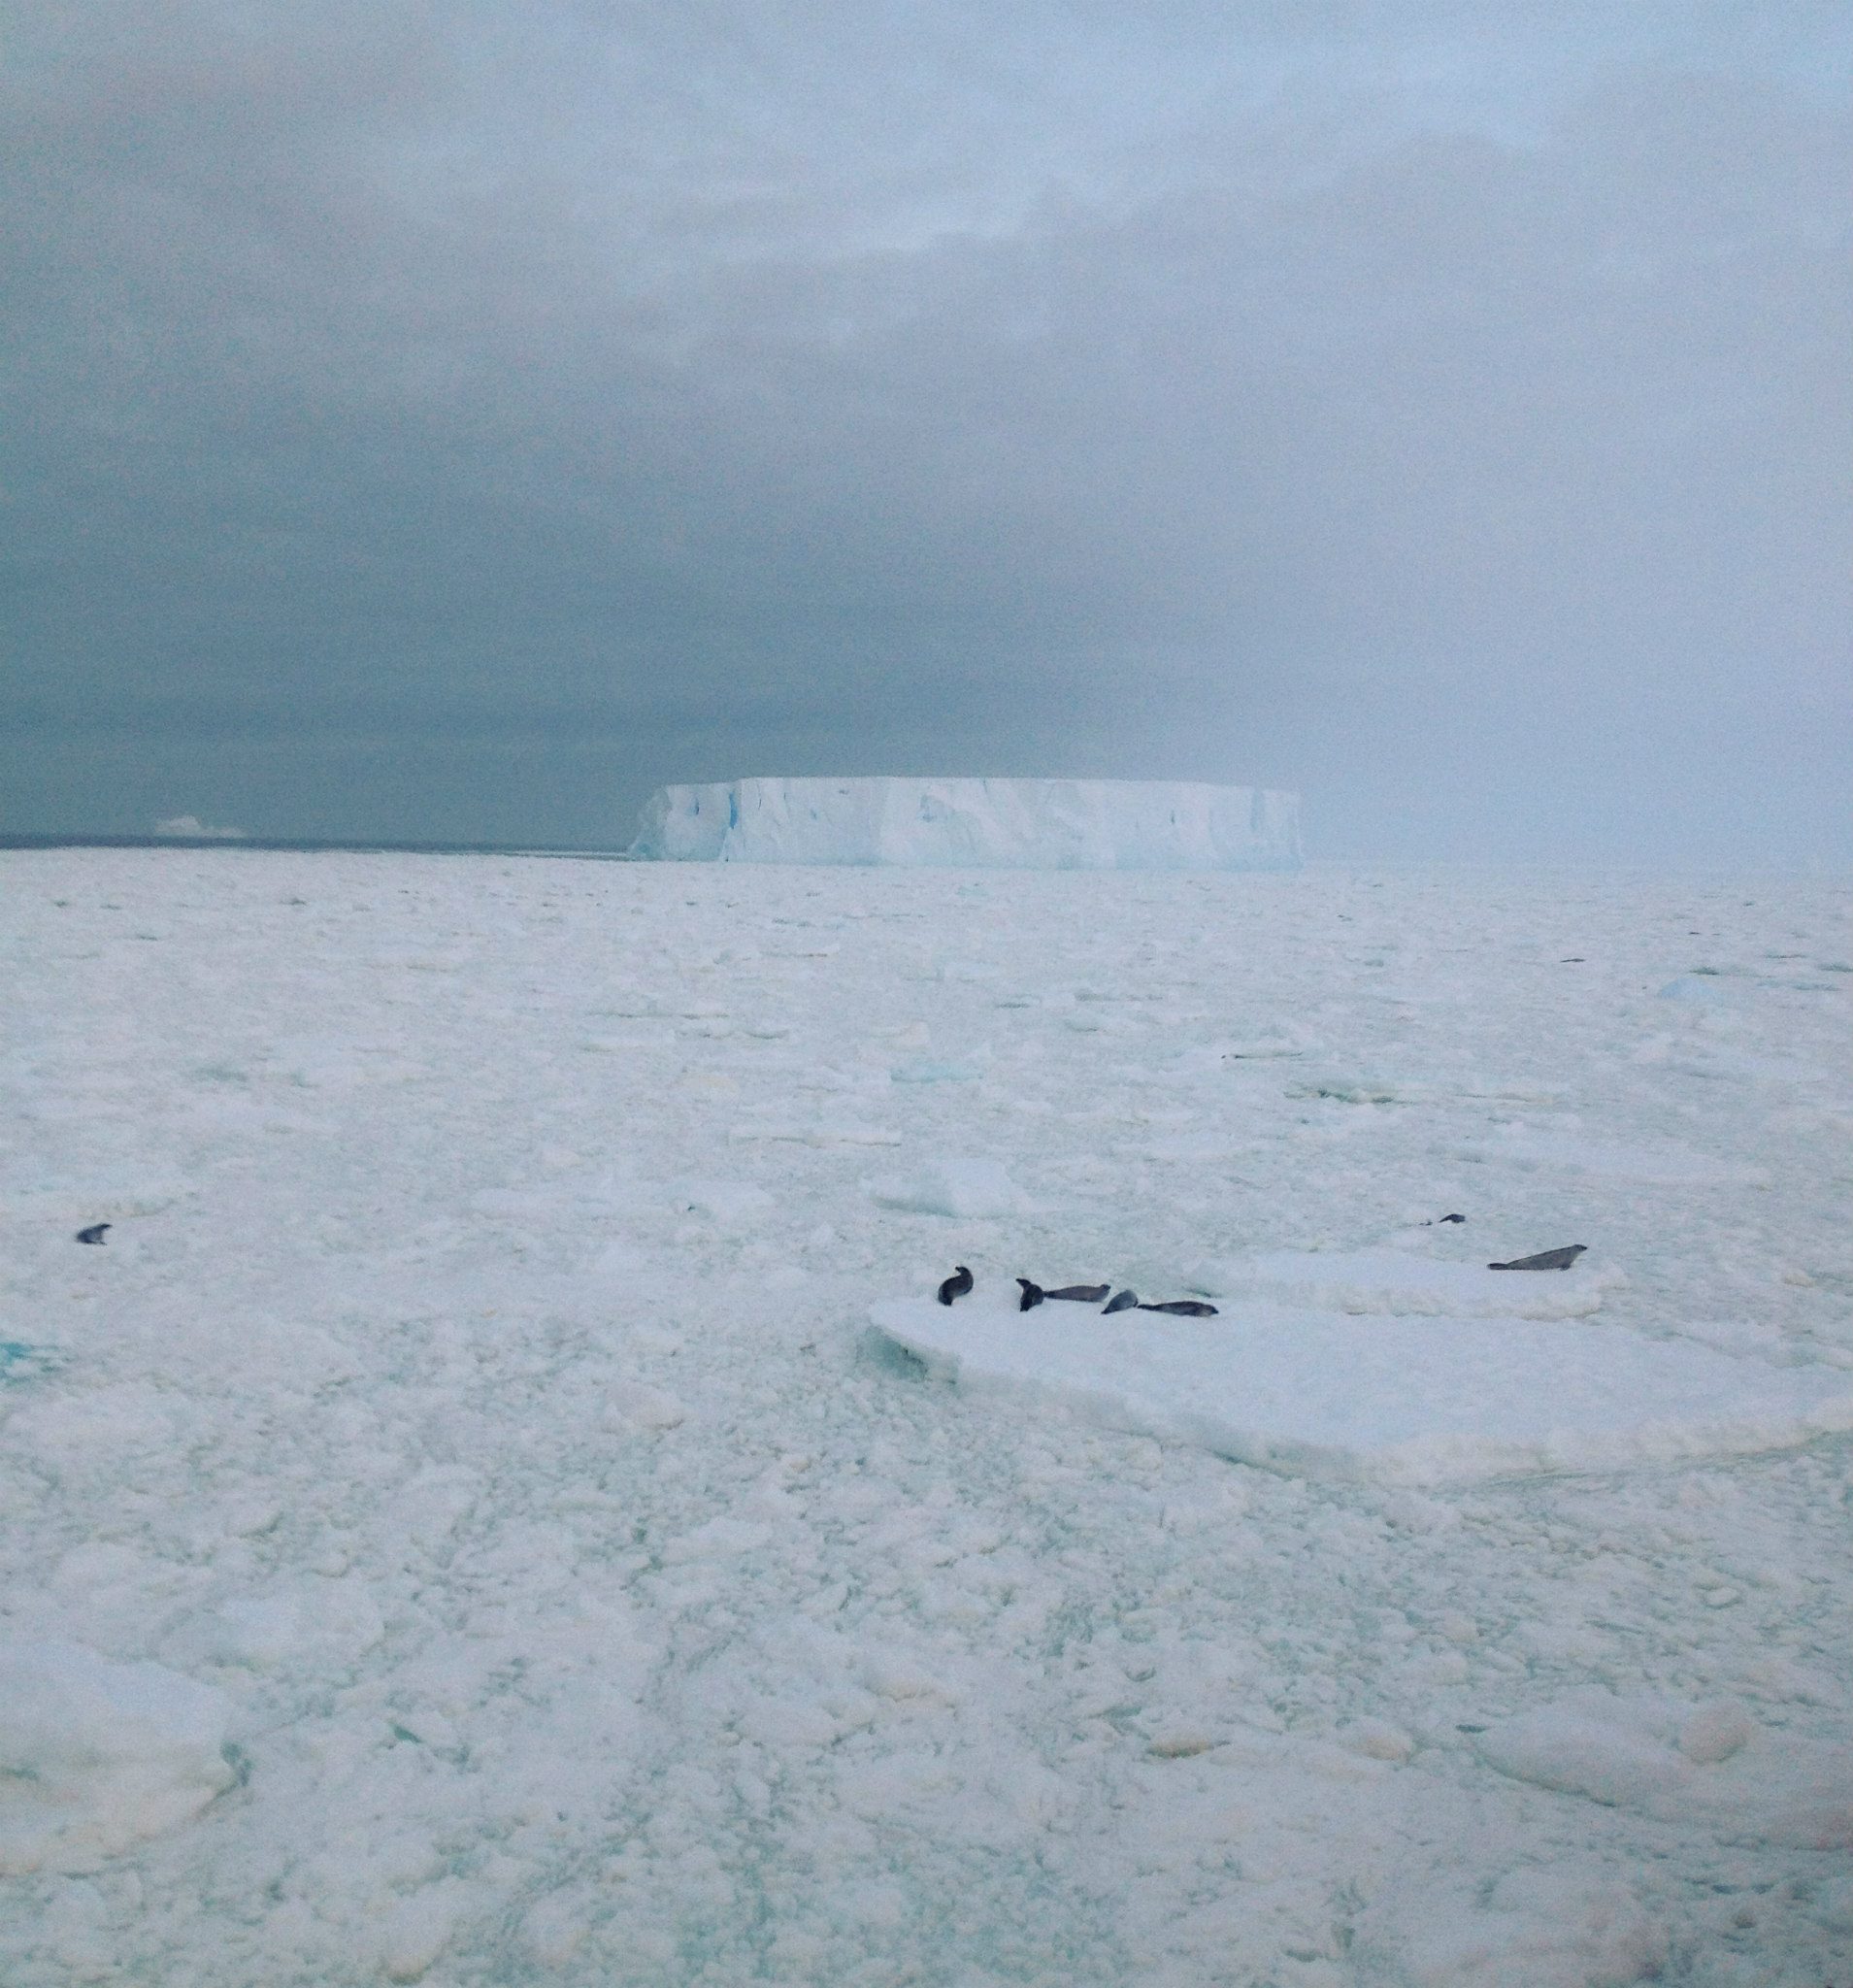 Four seals lay on an ice raft on a desolate icy landscape. A big iceberg is visible in the background. Clouds cover the sky, making the white snow and ice appear dark and gray.